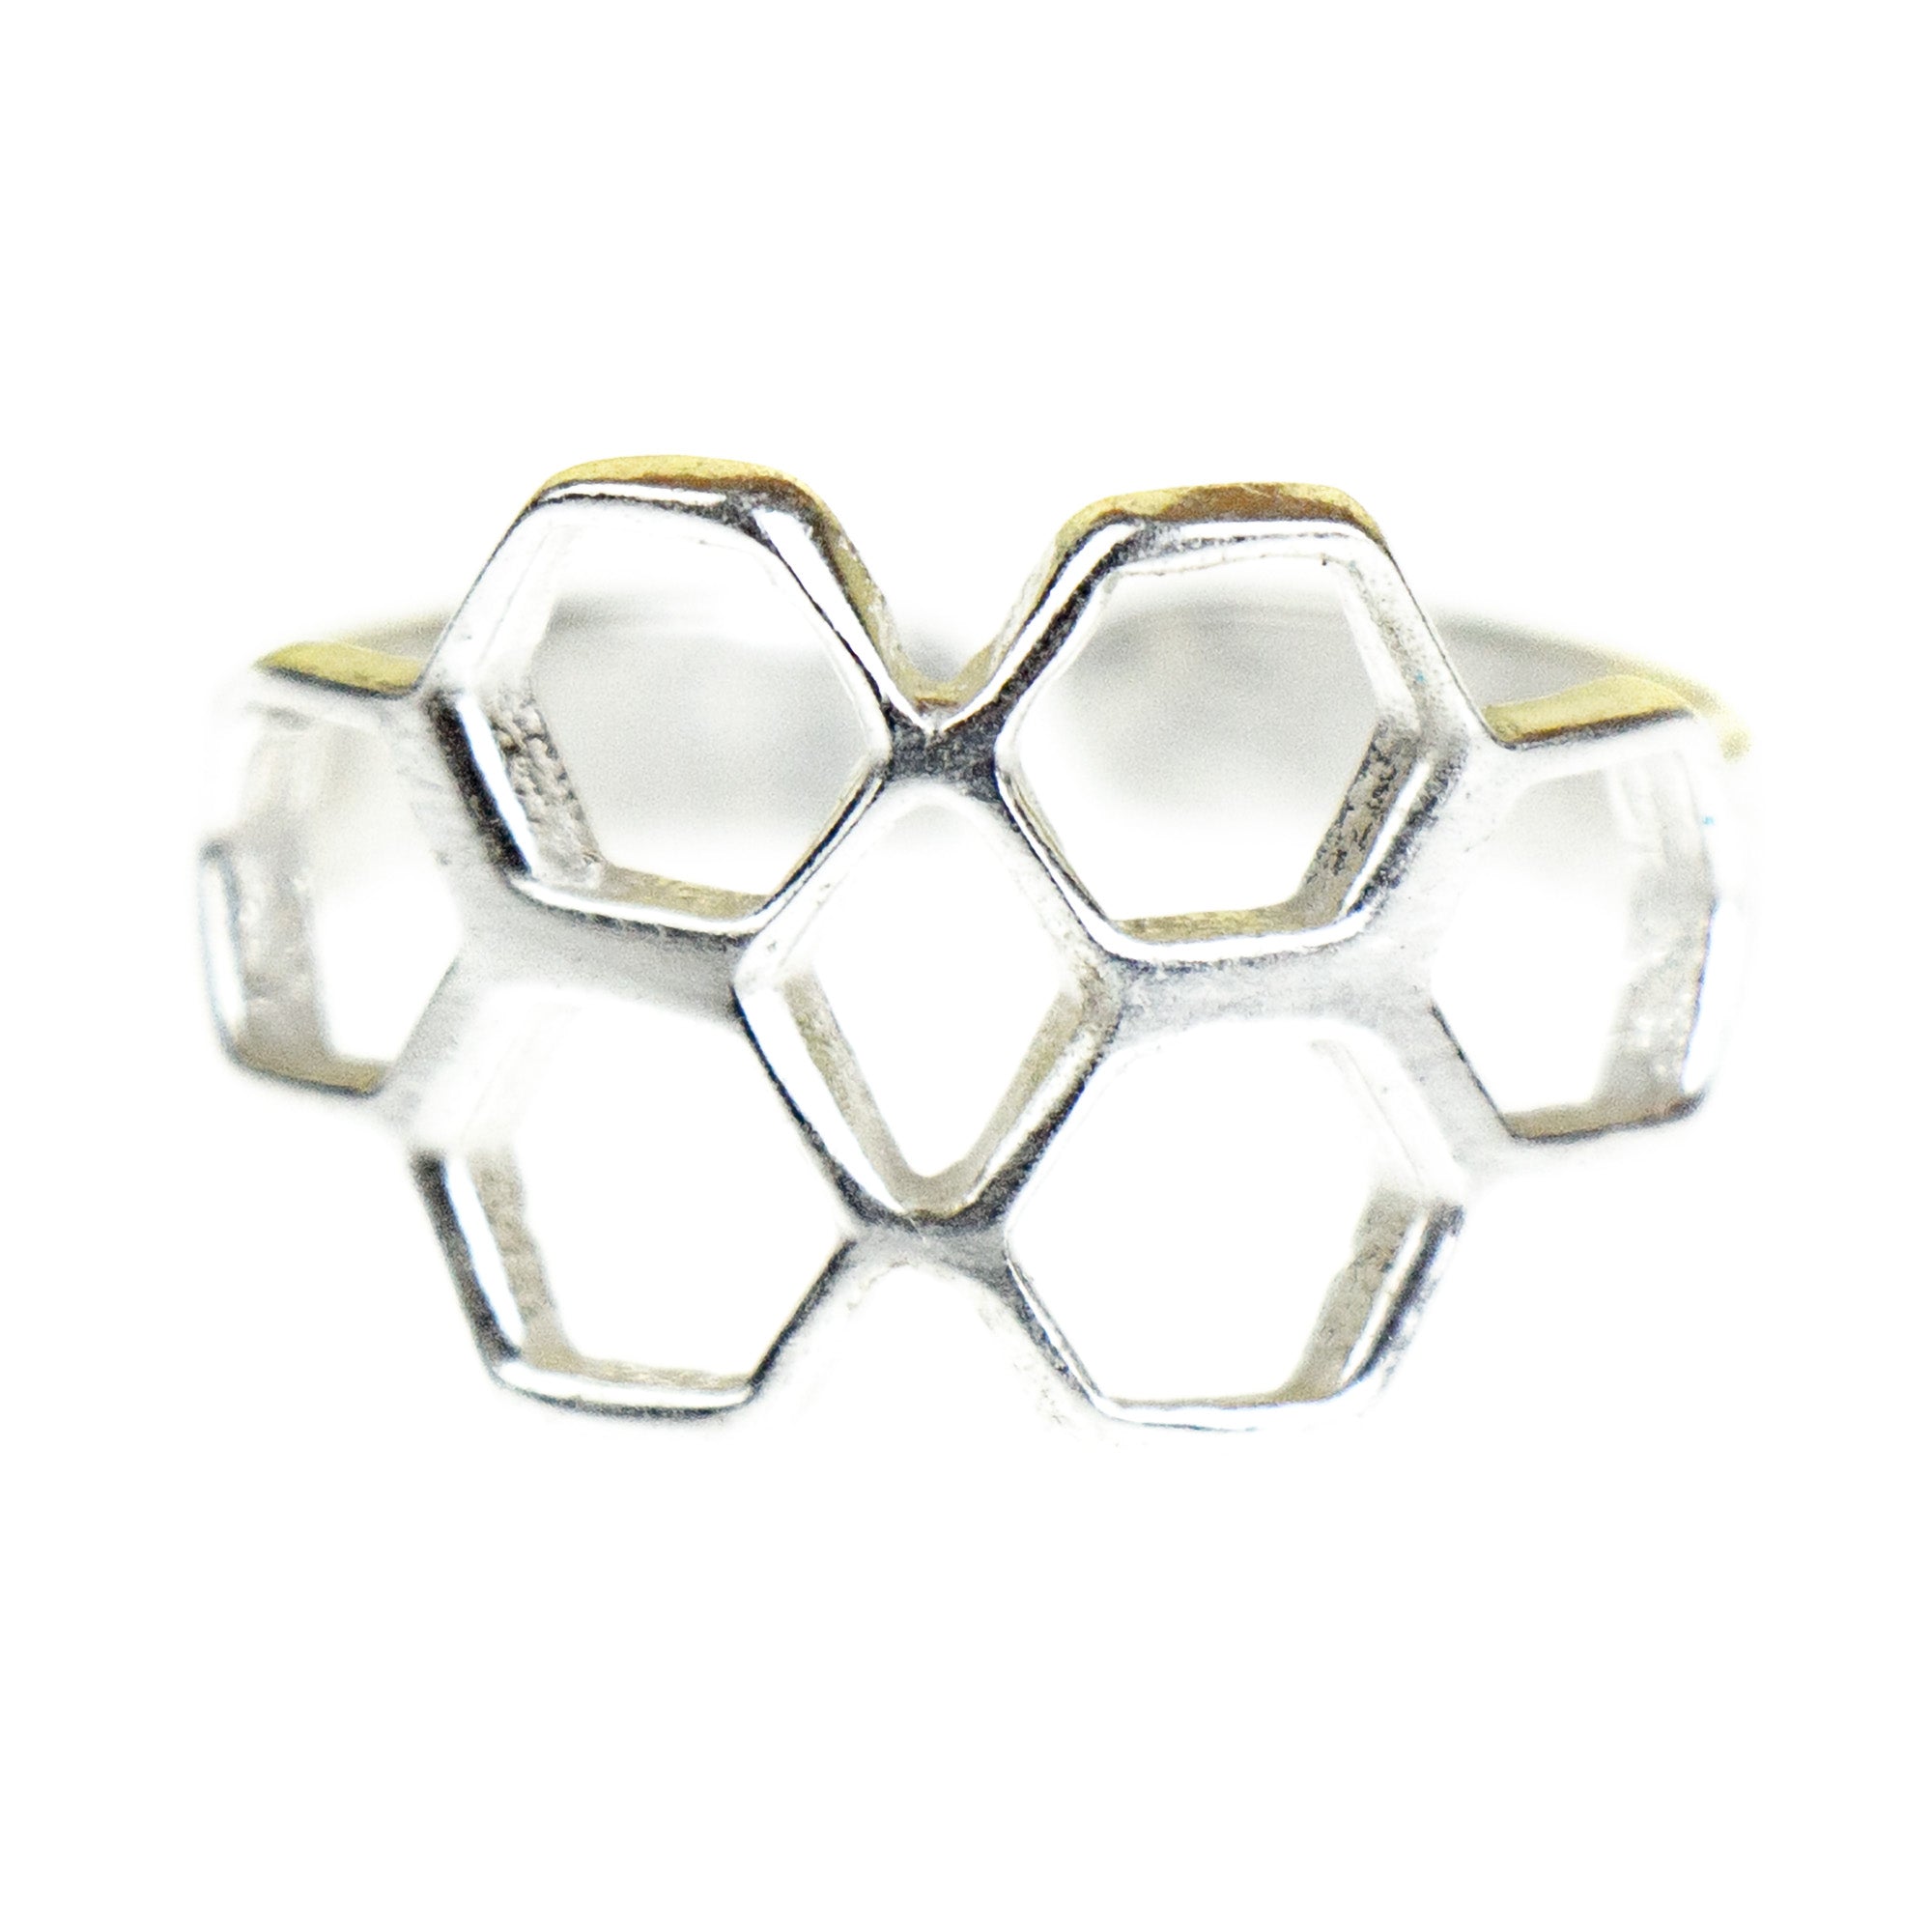 Honeycomb Adjustable Brass Ring, Silver Hue, PACK OF 3